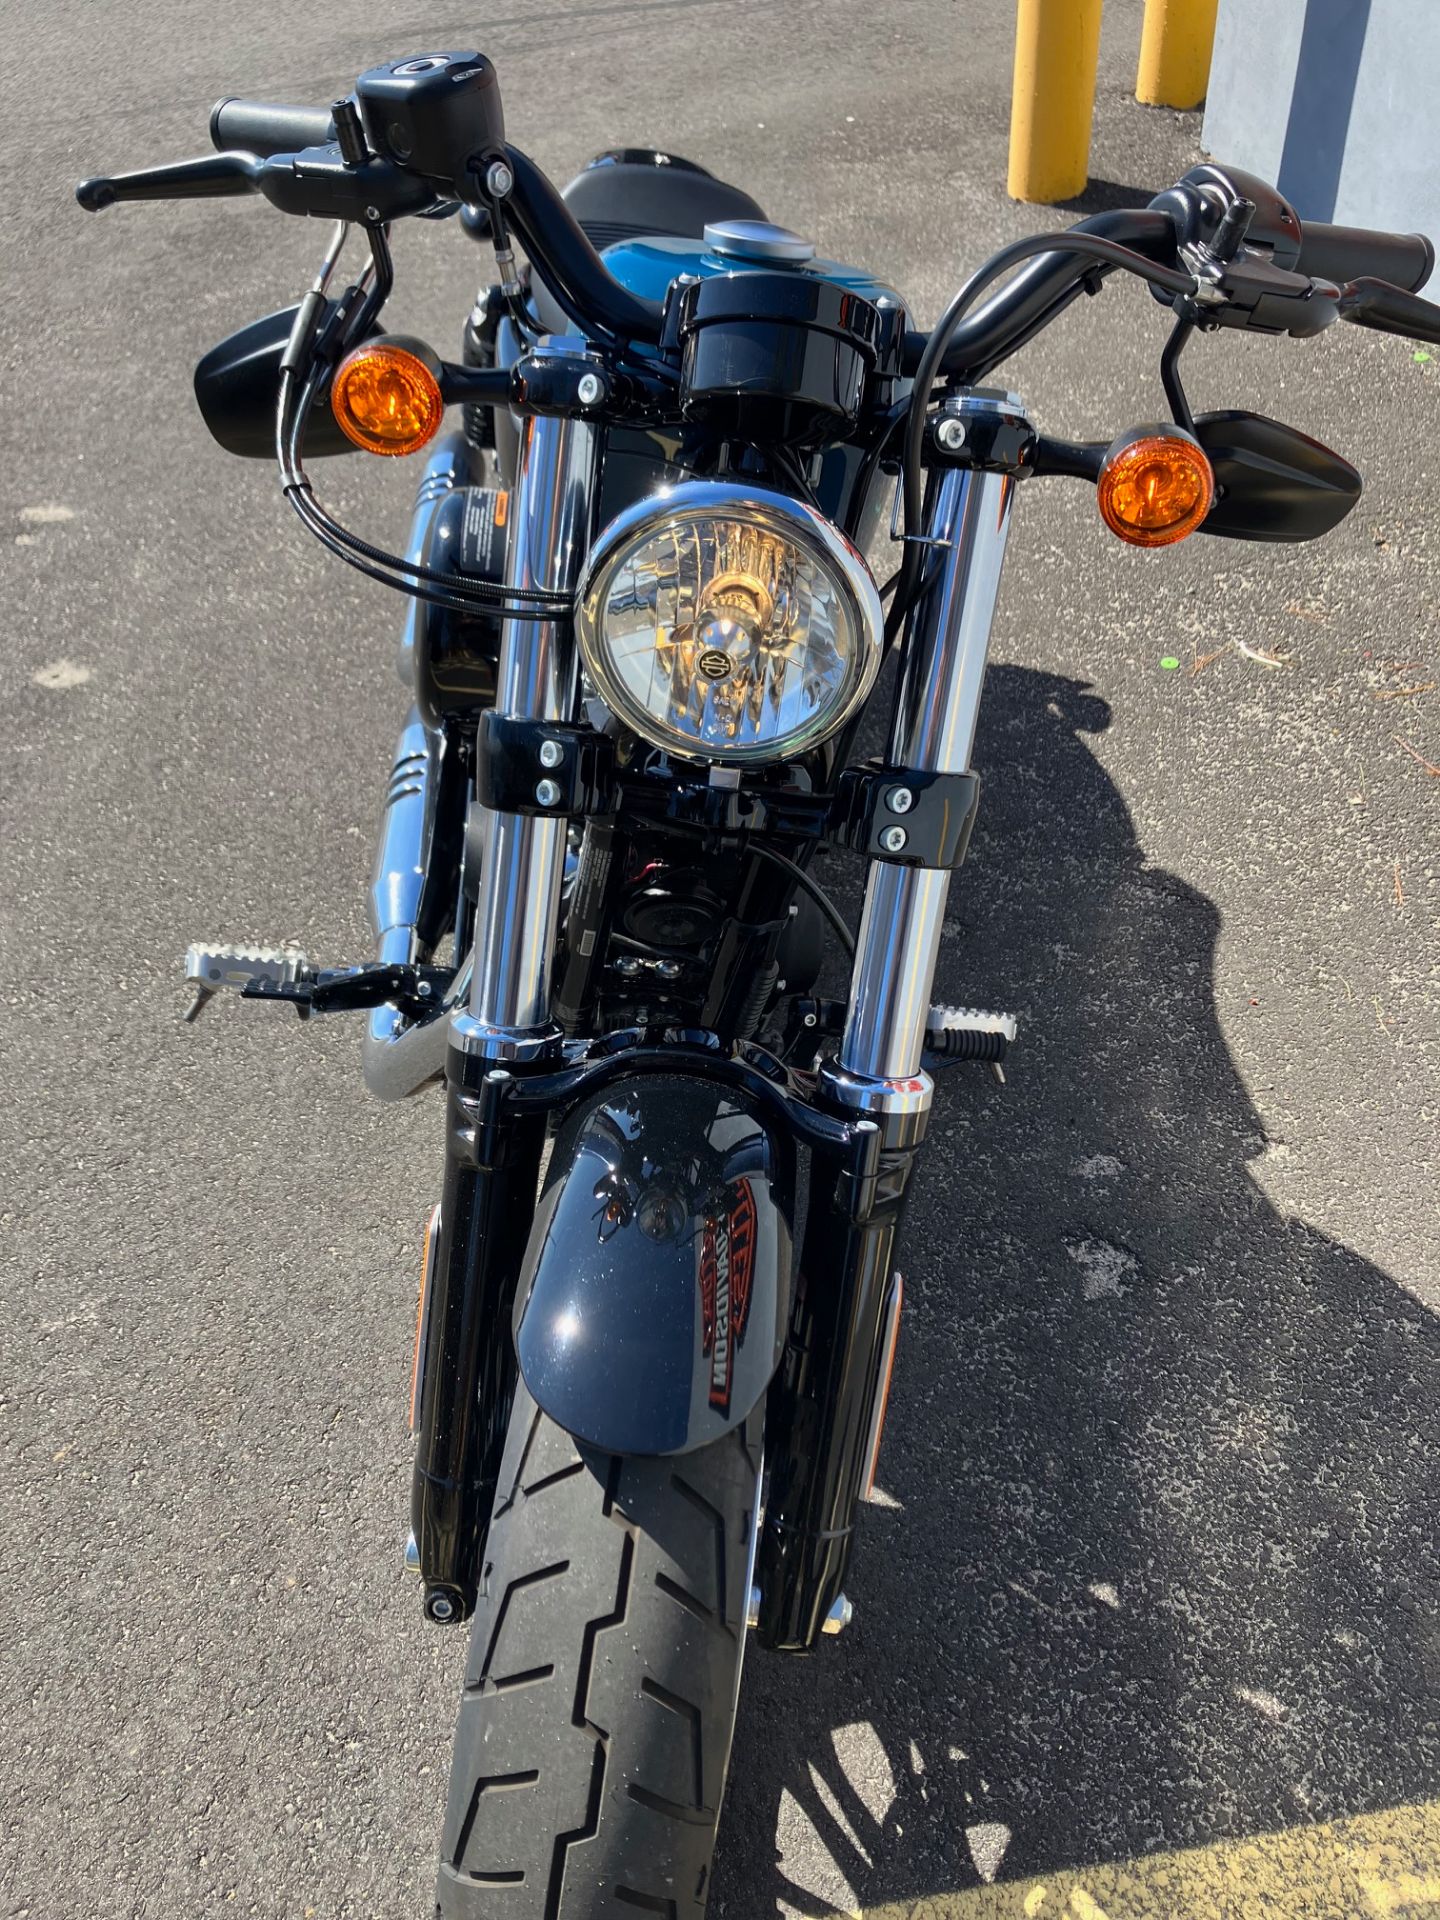 2021 Harley-Davidson FORTY-EIGHT in West Long Branch, New Jersey - Photo 2